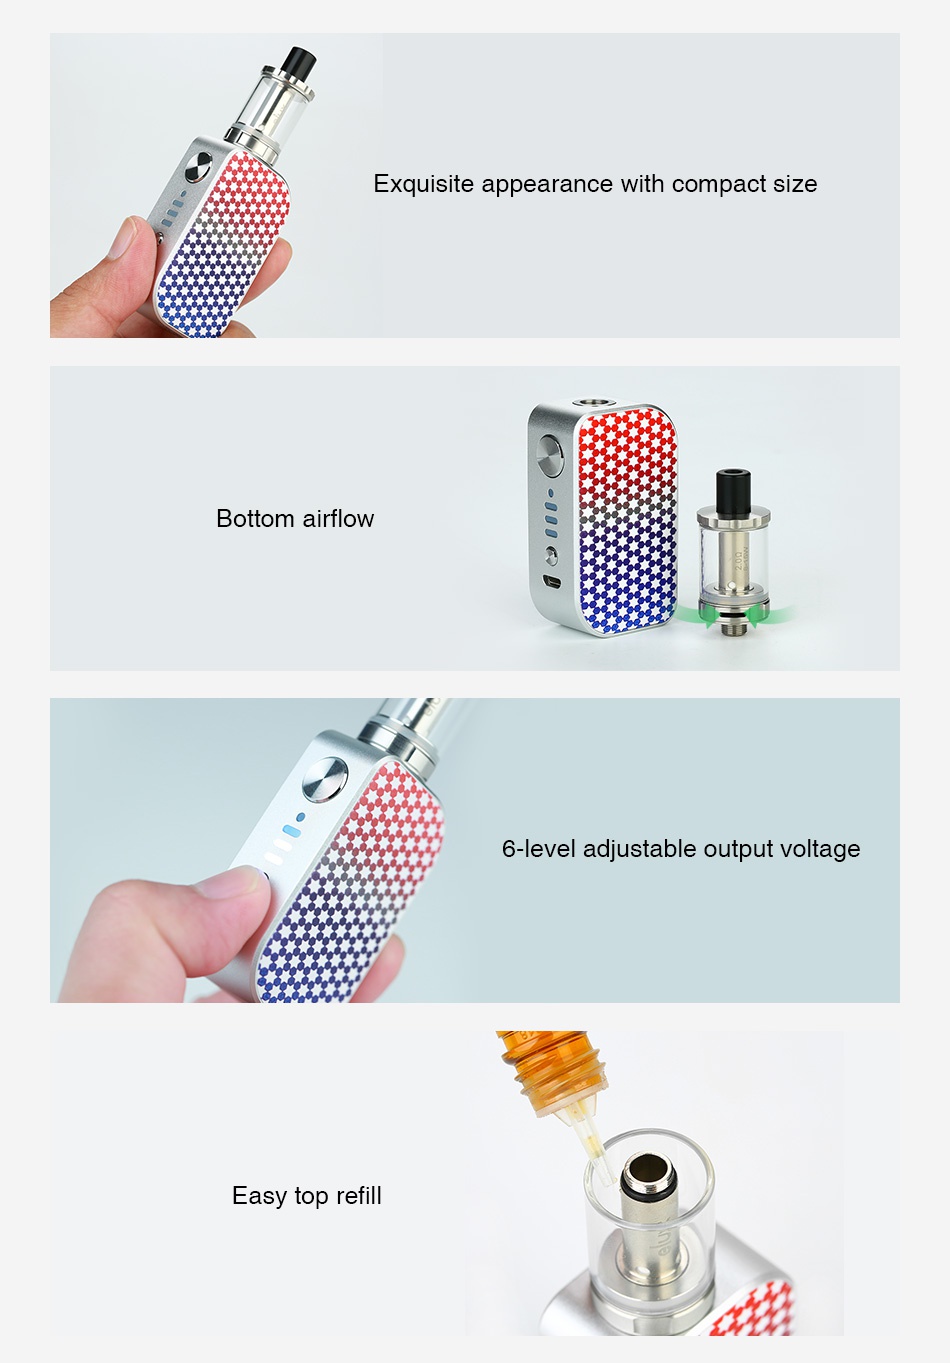 Arctic Dolphin ELUX Starter Kit 1300mAh Exquisite appearance with compact size     Bottom airflow 6 level adjustable output voltage Easy top refi